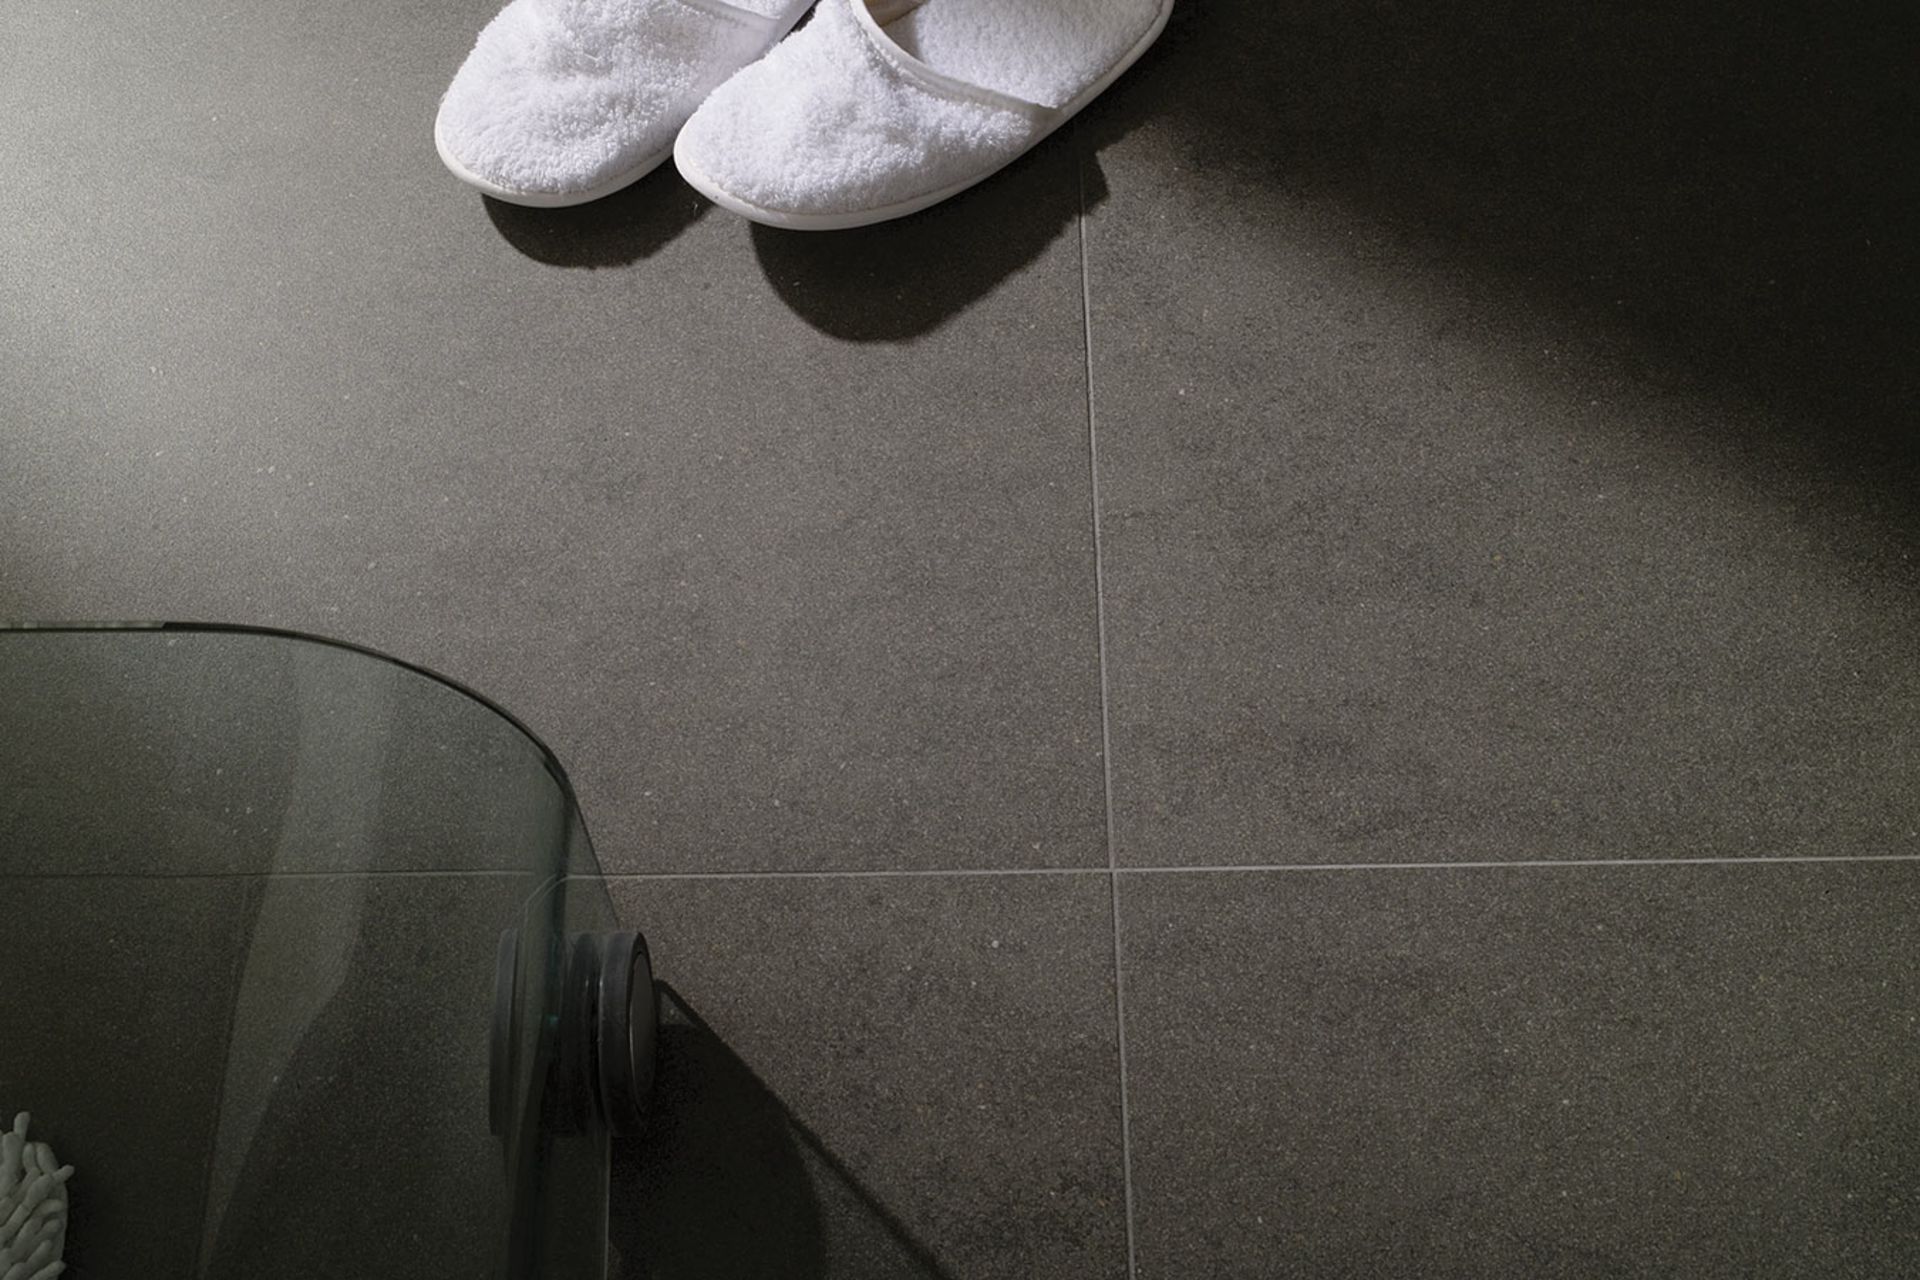 8.52 Square Meters of Porcelanosa Avenue Black Nature Wall and Floor Tiles. 59.6x59.6cm per tile. - Image 5 of 5